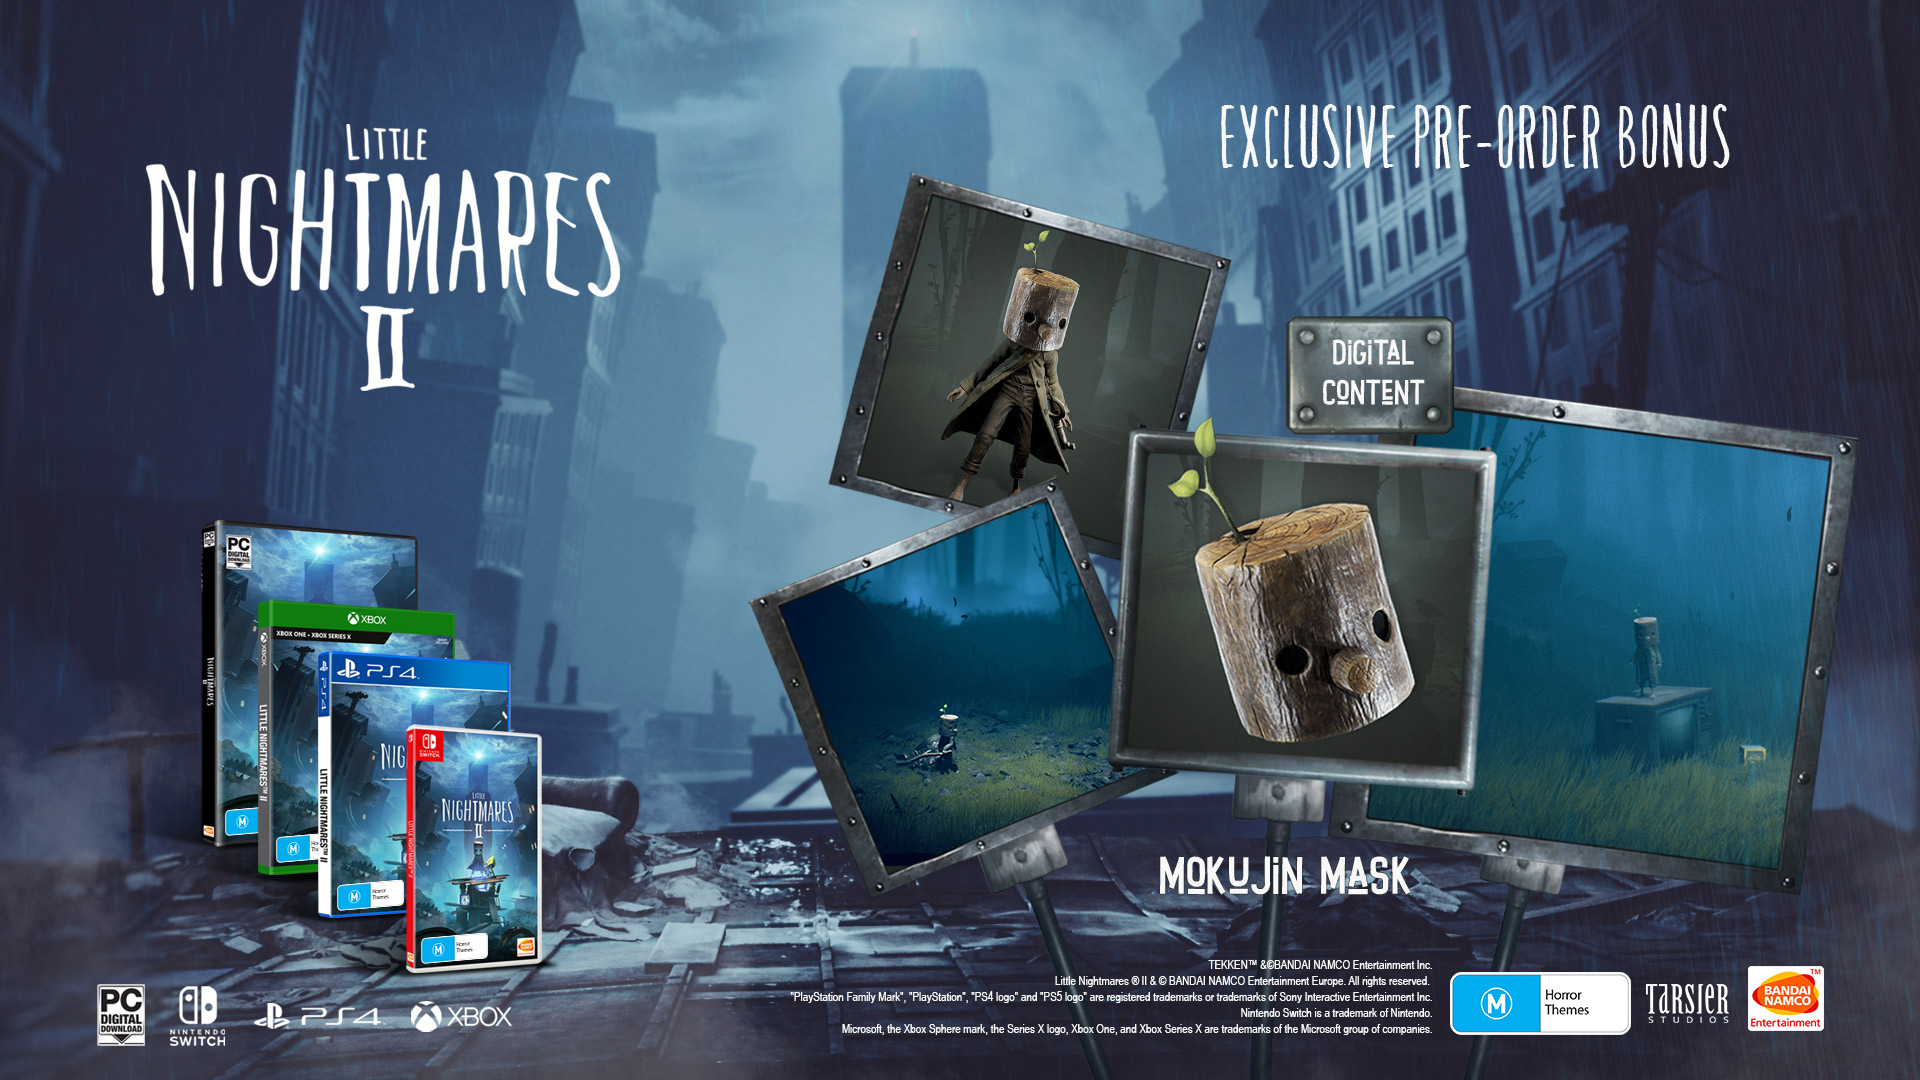 Pre-orders for Little Nightmares II are available now!